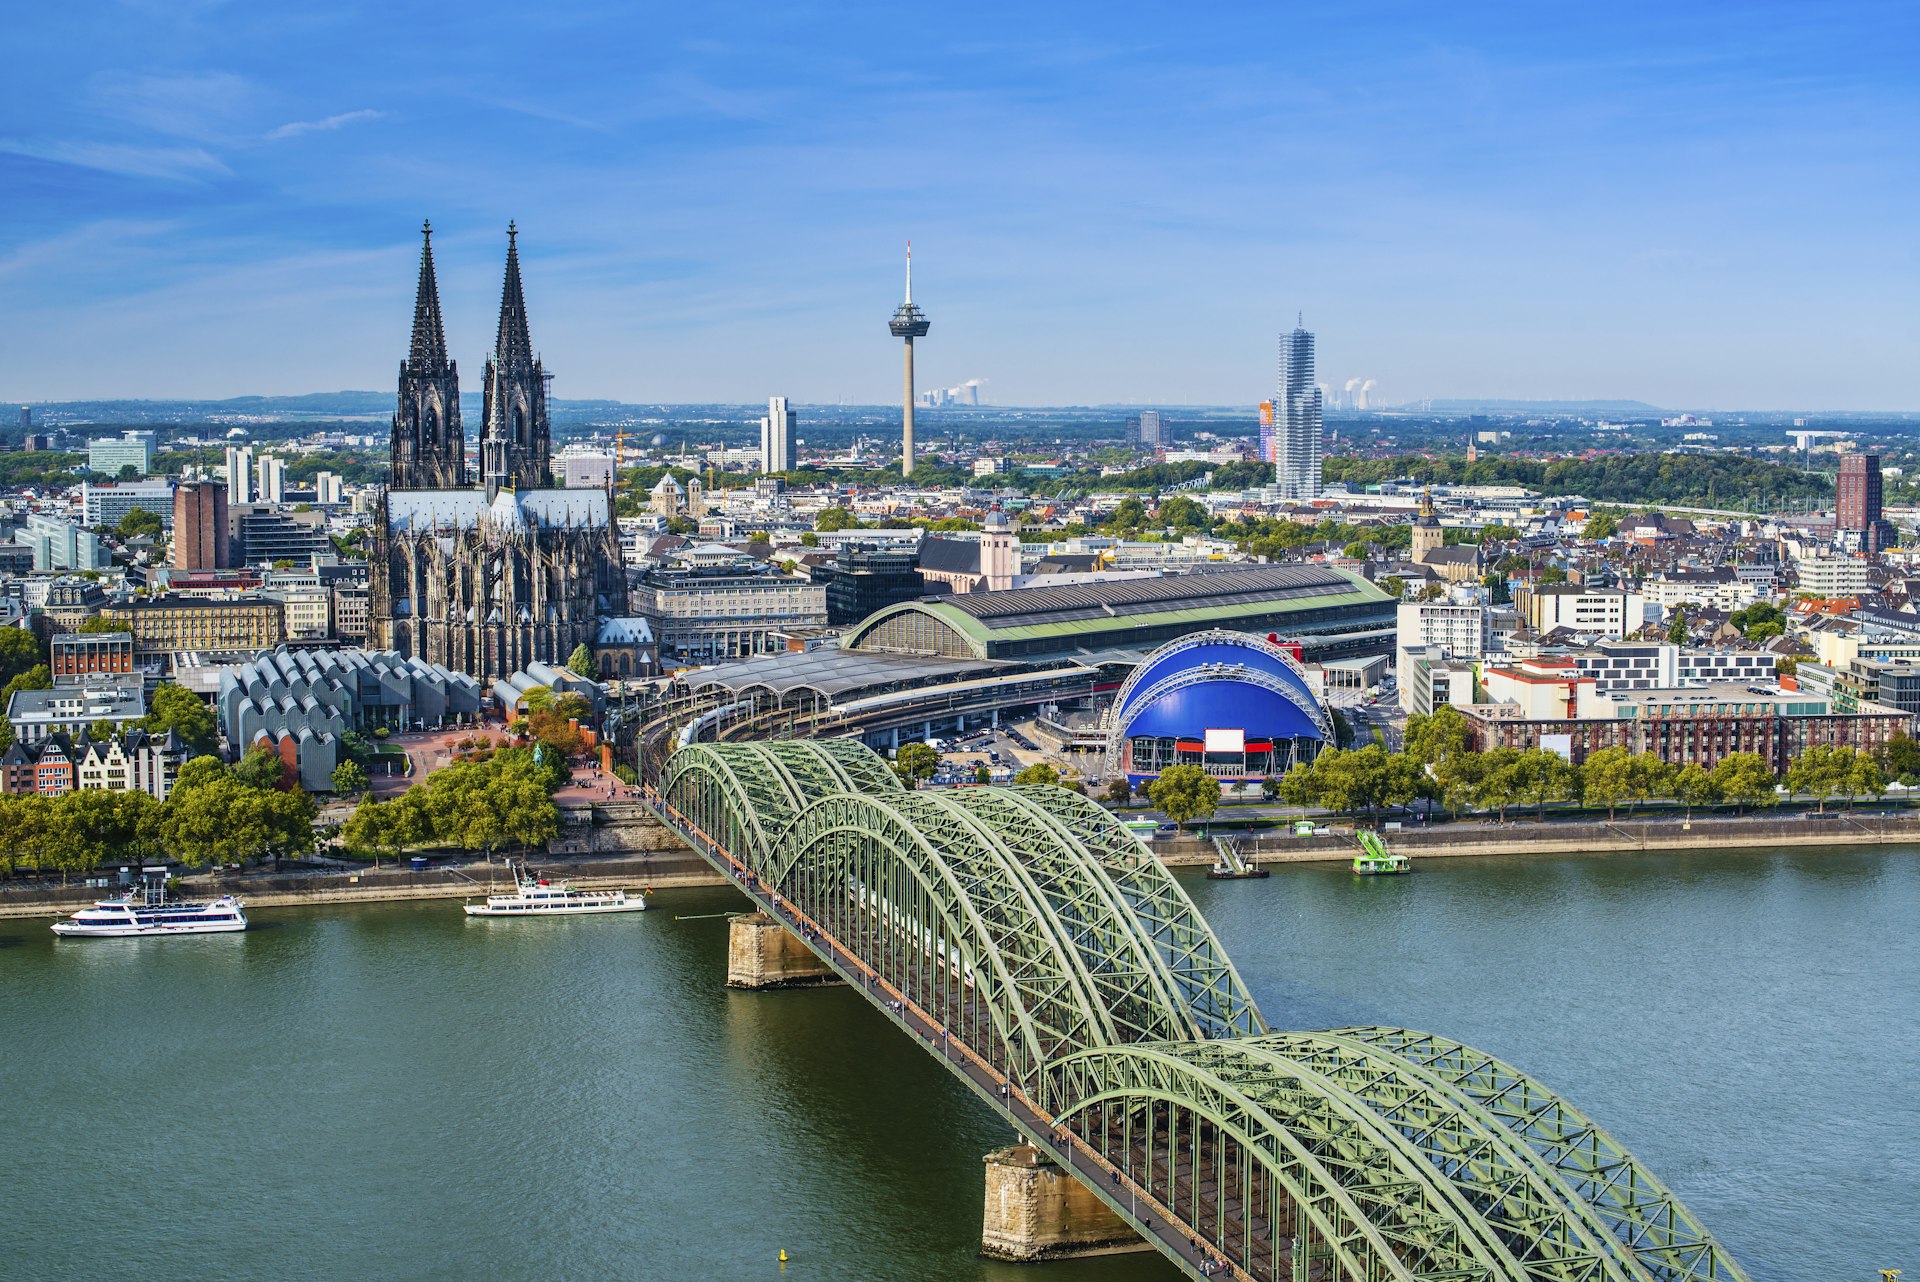 Aerial view of Cologne, Germany, over the Rhine River